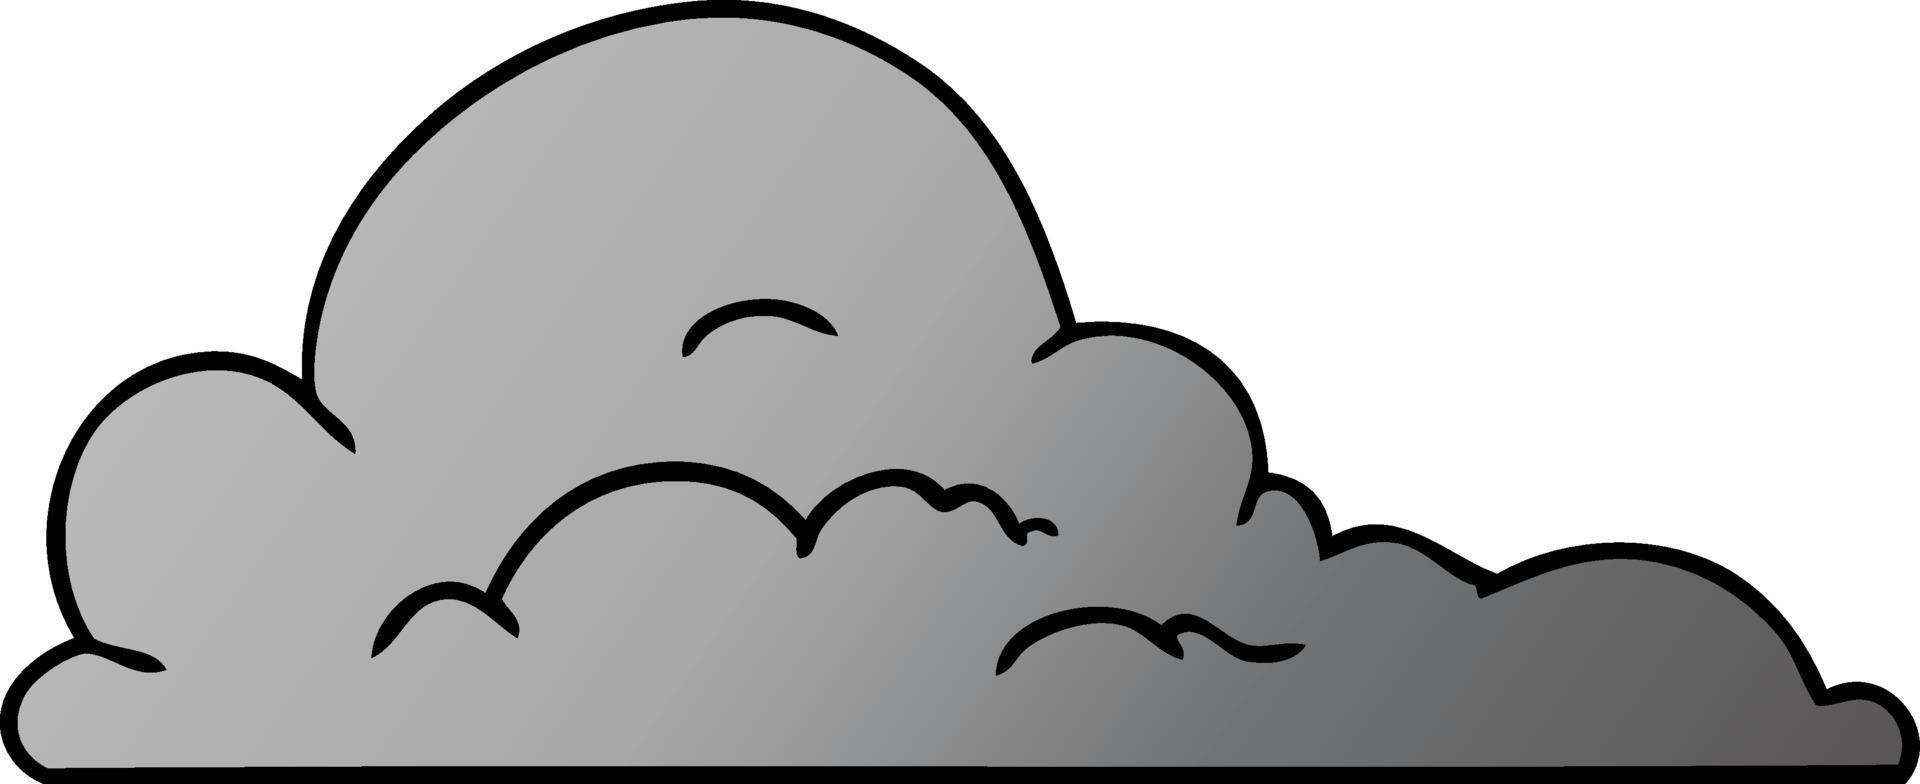 gradient cartoon doodle of white large clouds vector